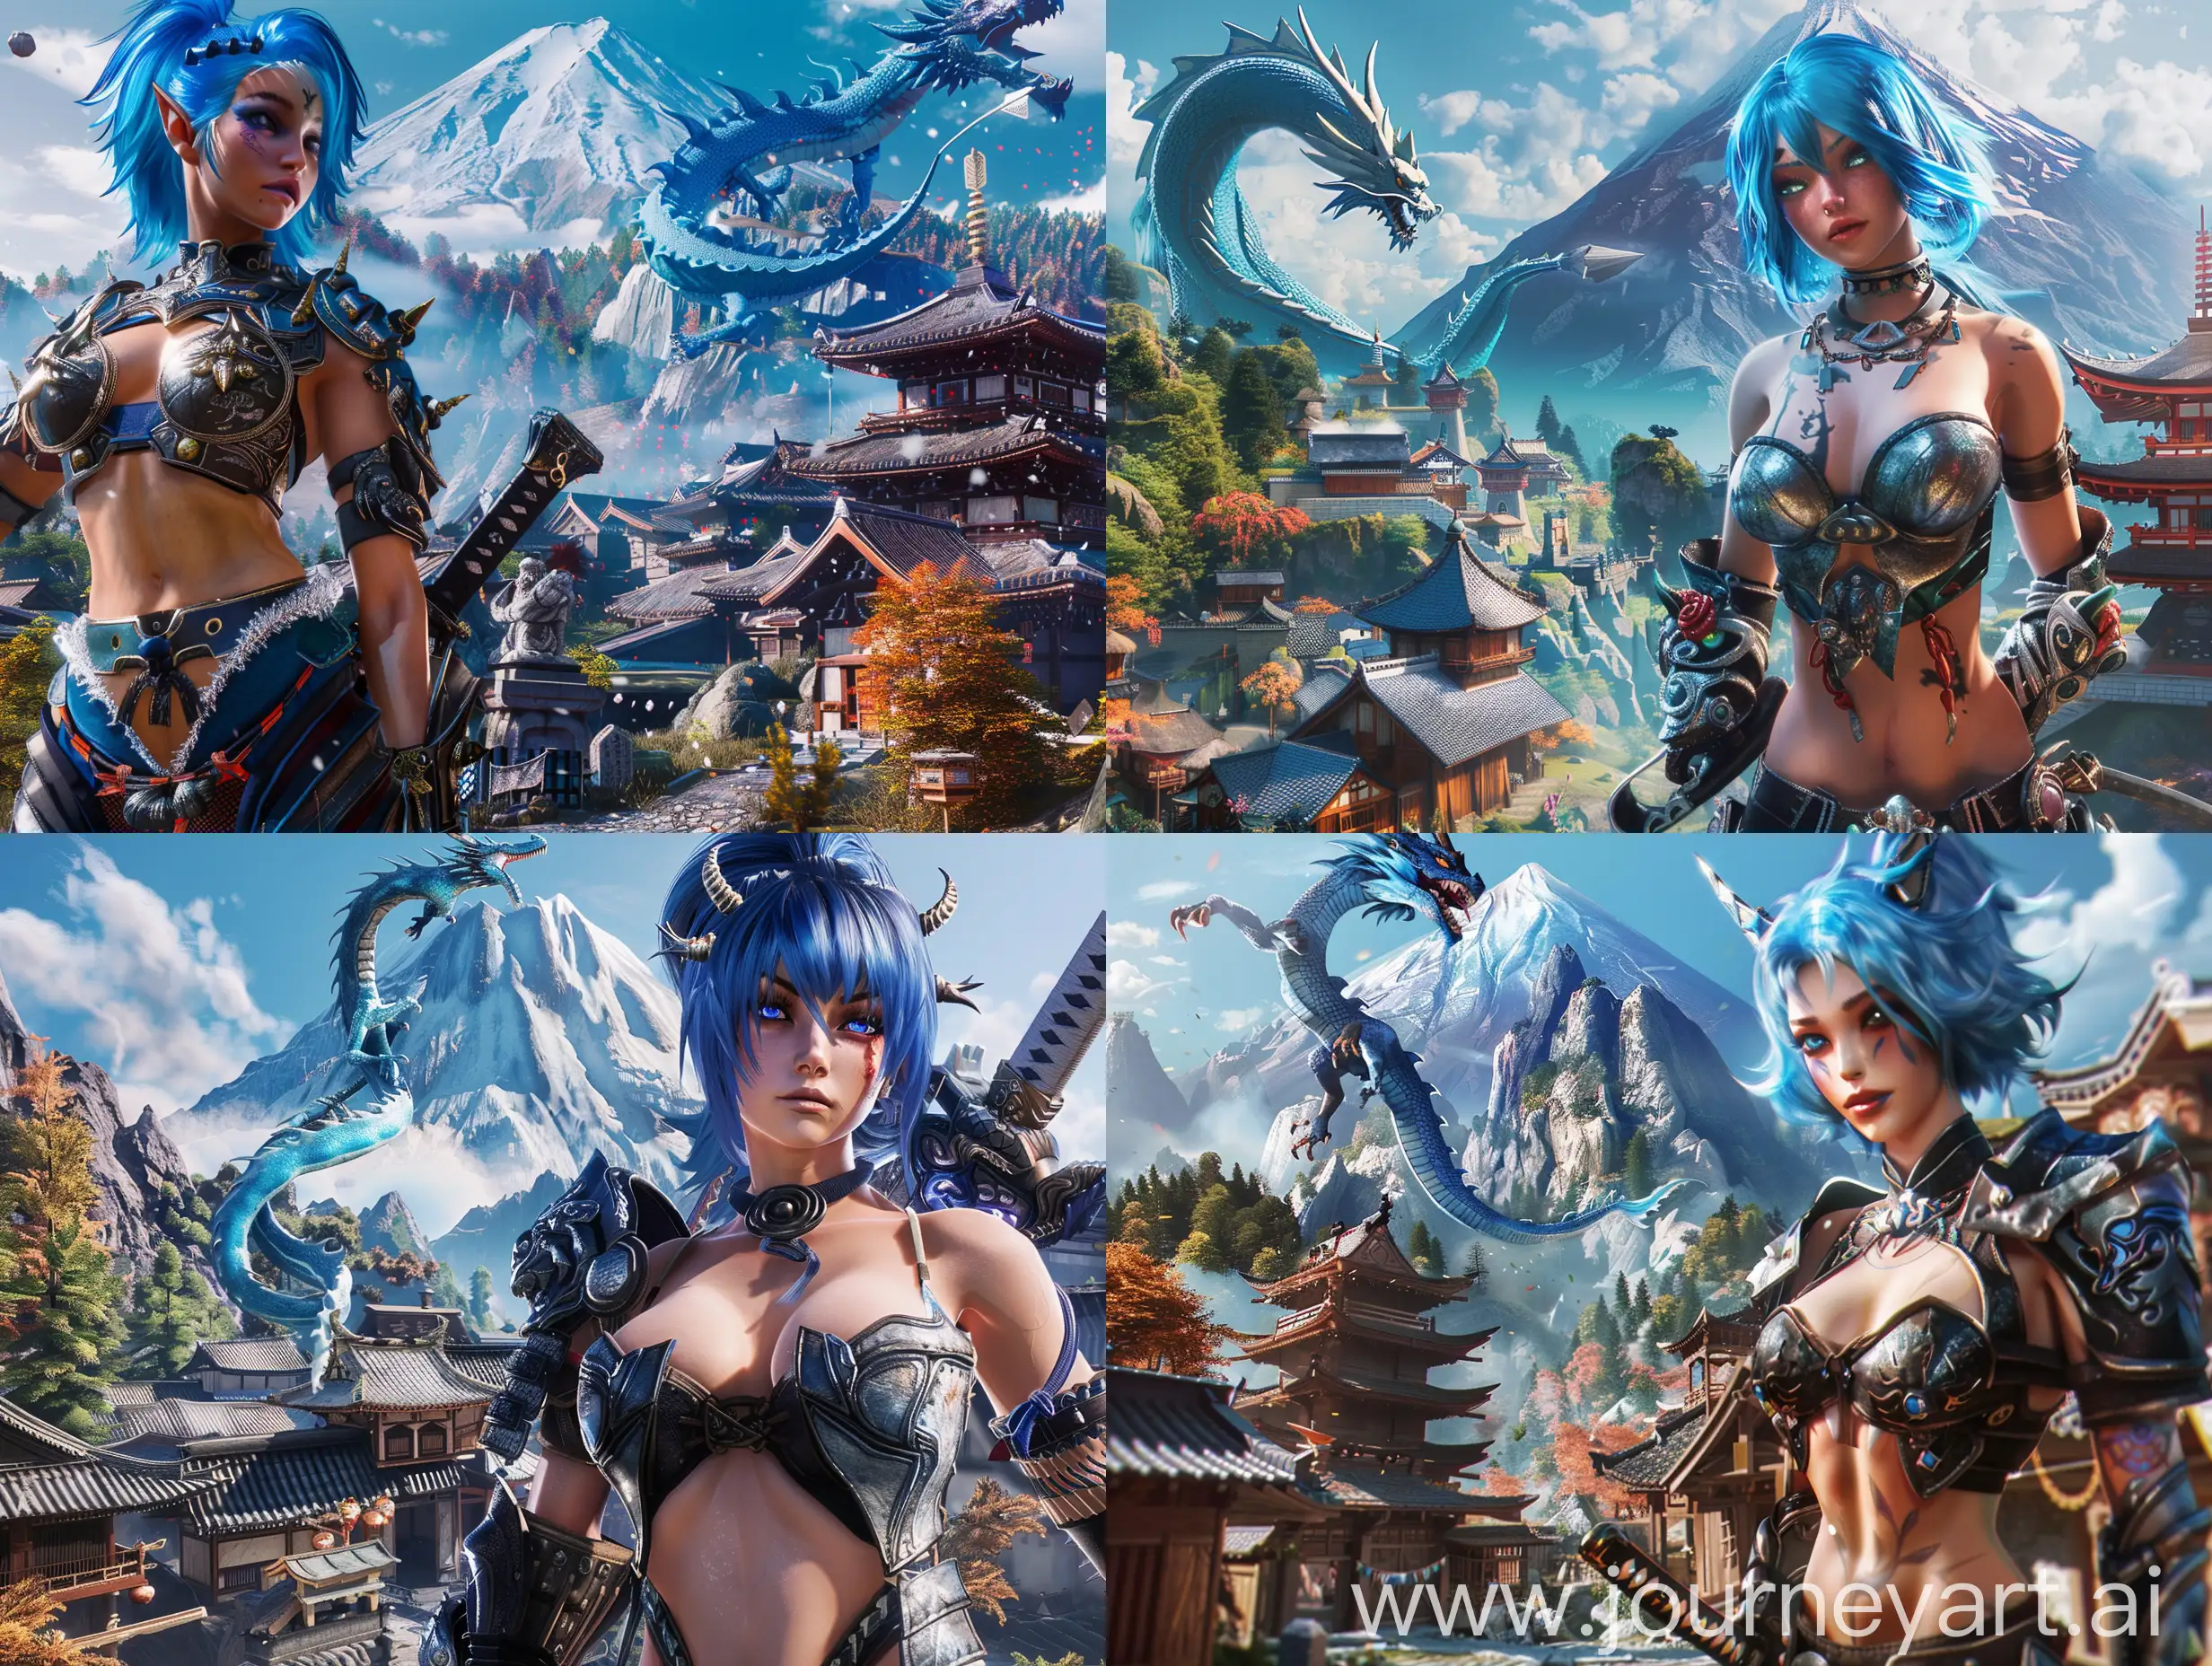 A mountain in the background, a blue dragon in the sky, a village with Far Eastern architecture in the foreground, a very beautiful Japanese woman with a low-cut top, armored top and holding a large, fantastic sword in her hand. The woman's hair is blue.quality unreal engine 4